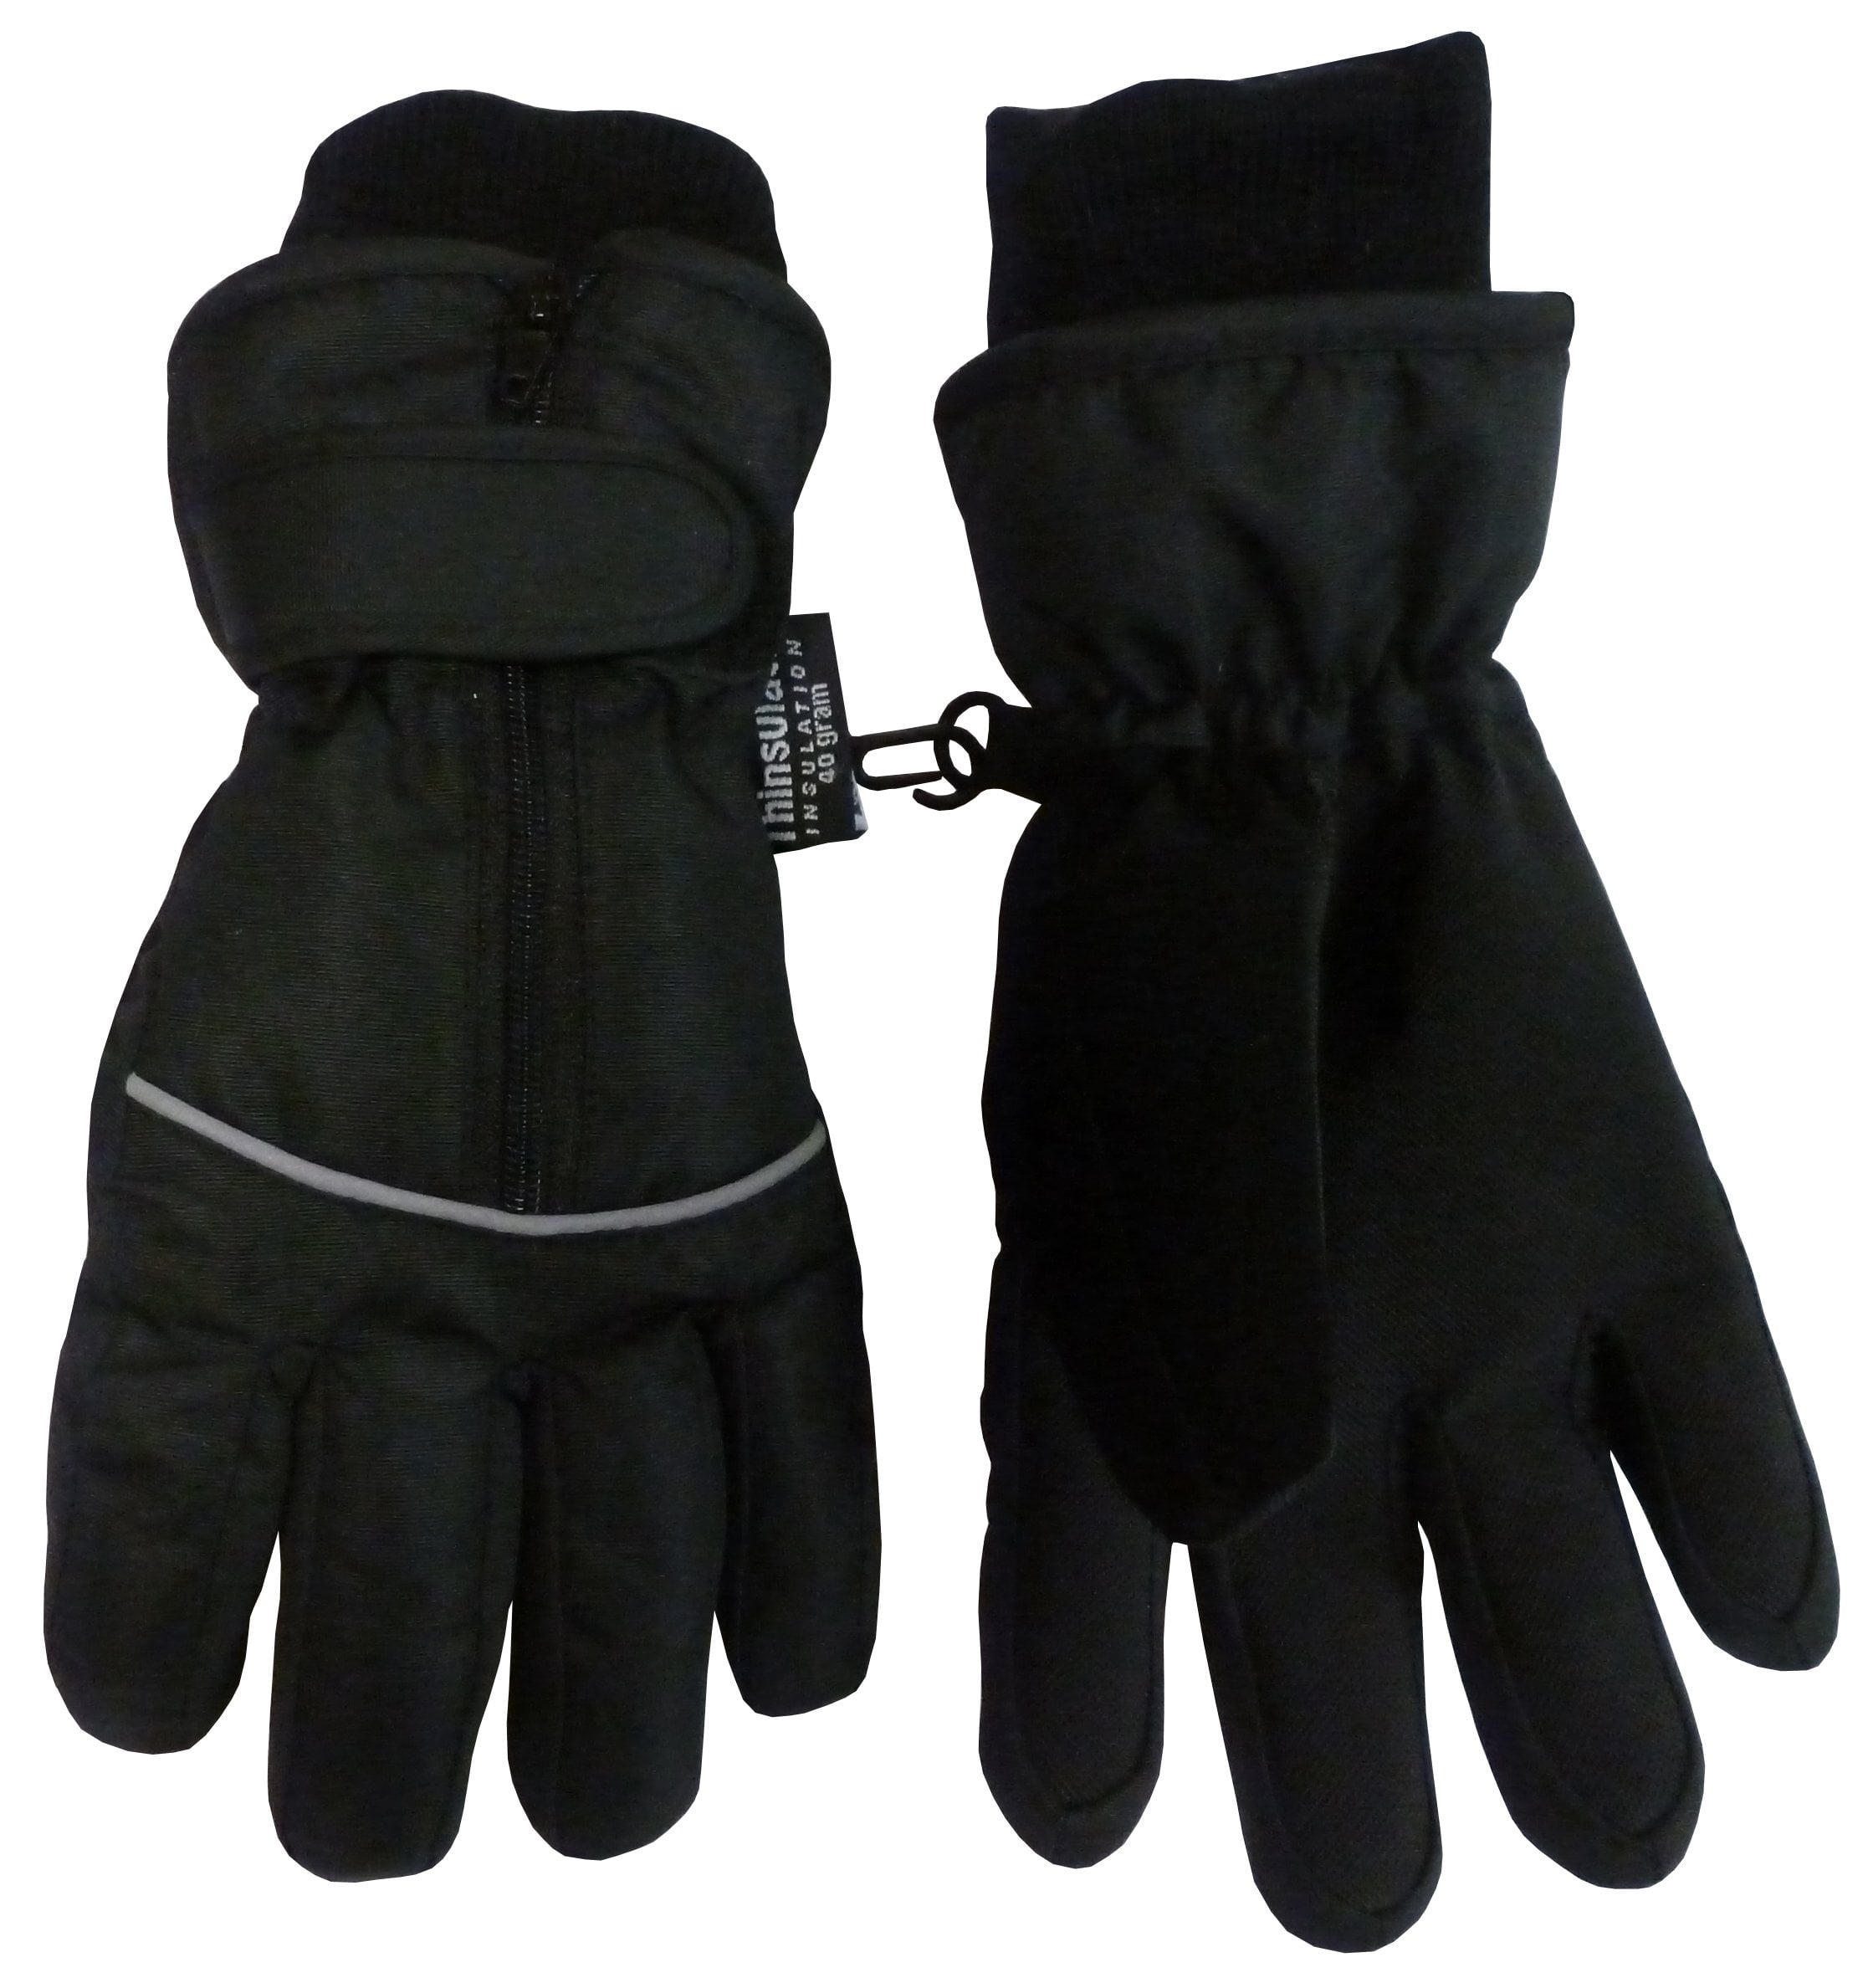 Black Kids Ski Gloves Thermal Winter Warm Insulated by Thinsulate 